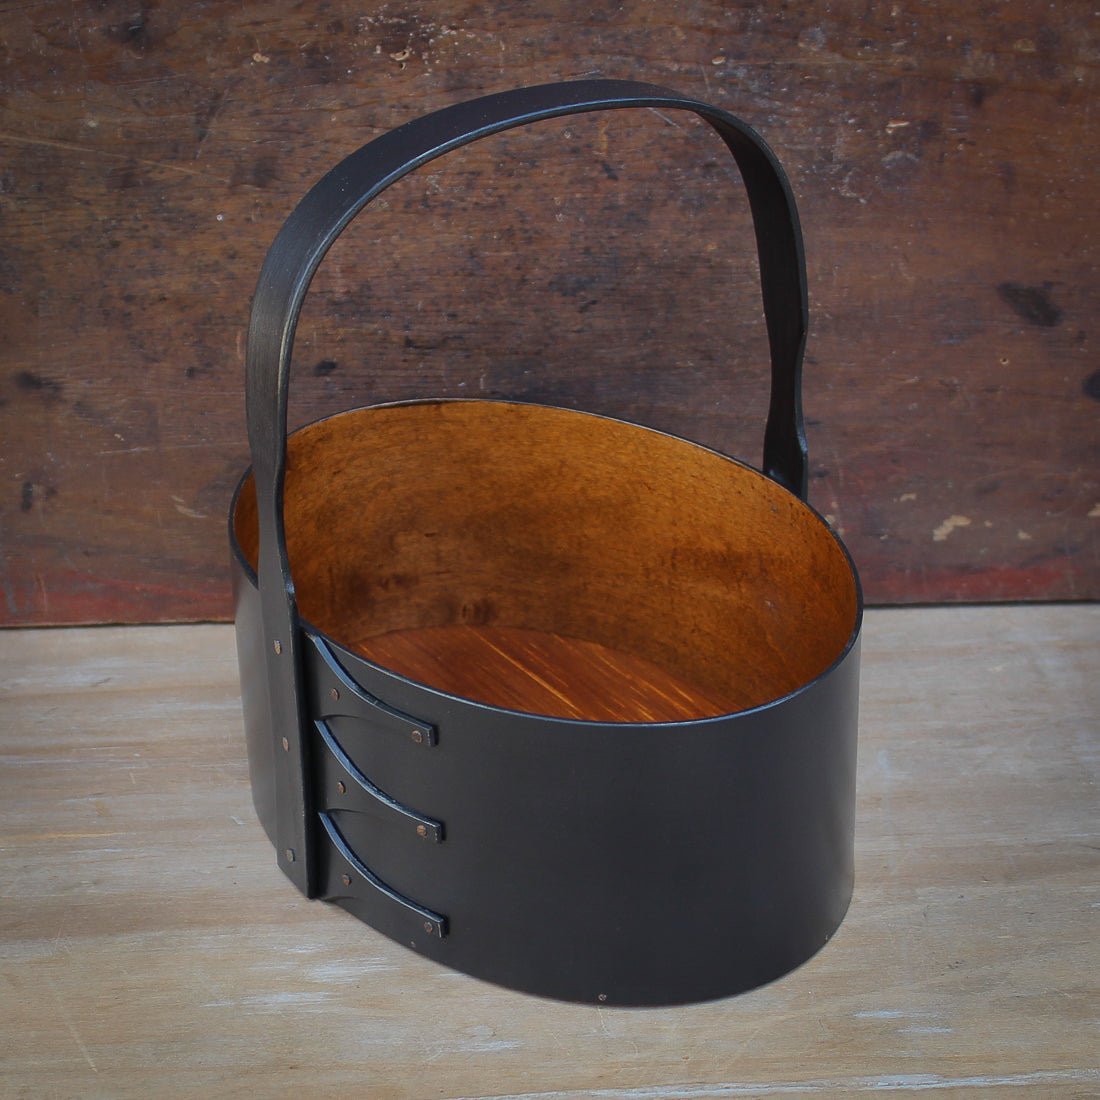 Shaker Carrier, Size #4, LeHays Shaker Boxes, Handcrafted in Maine, Black Milk Paint Finish, Side View